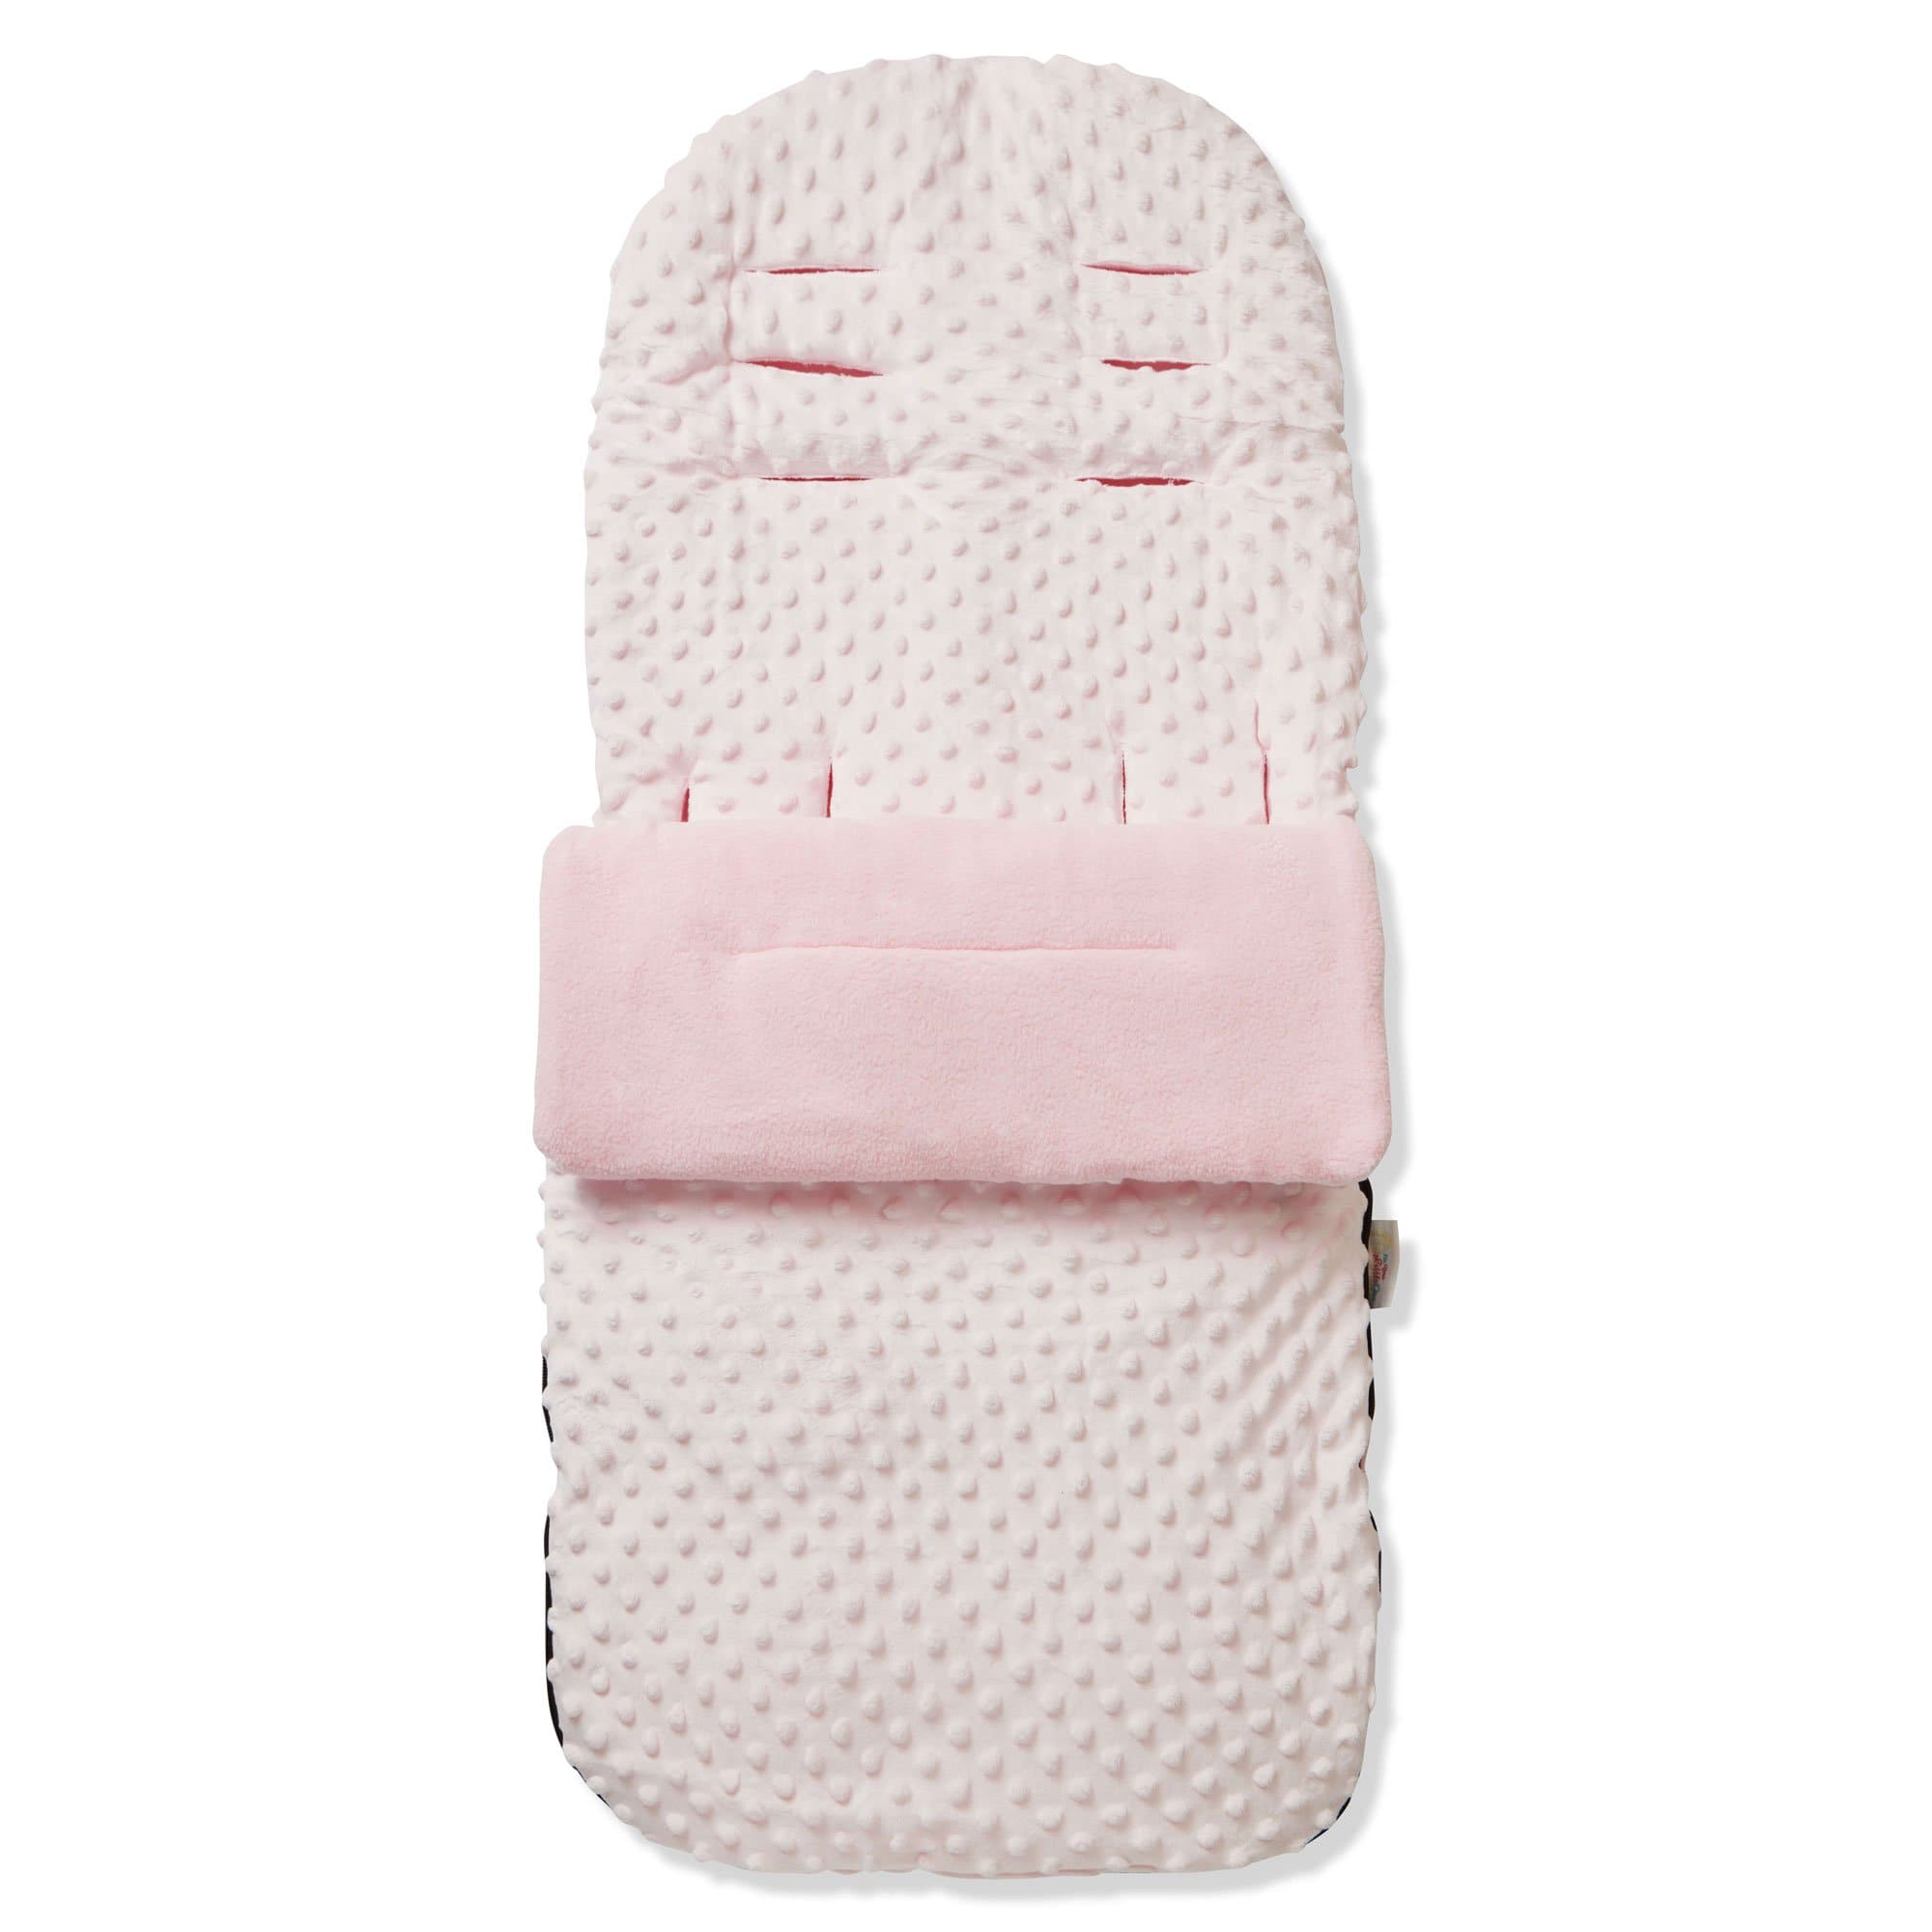 Dimple Footmuff / Cosy Toes Compatible with Bugaboo - Pink / Fits All Models | For Your Little One